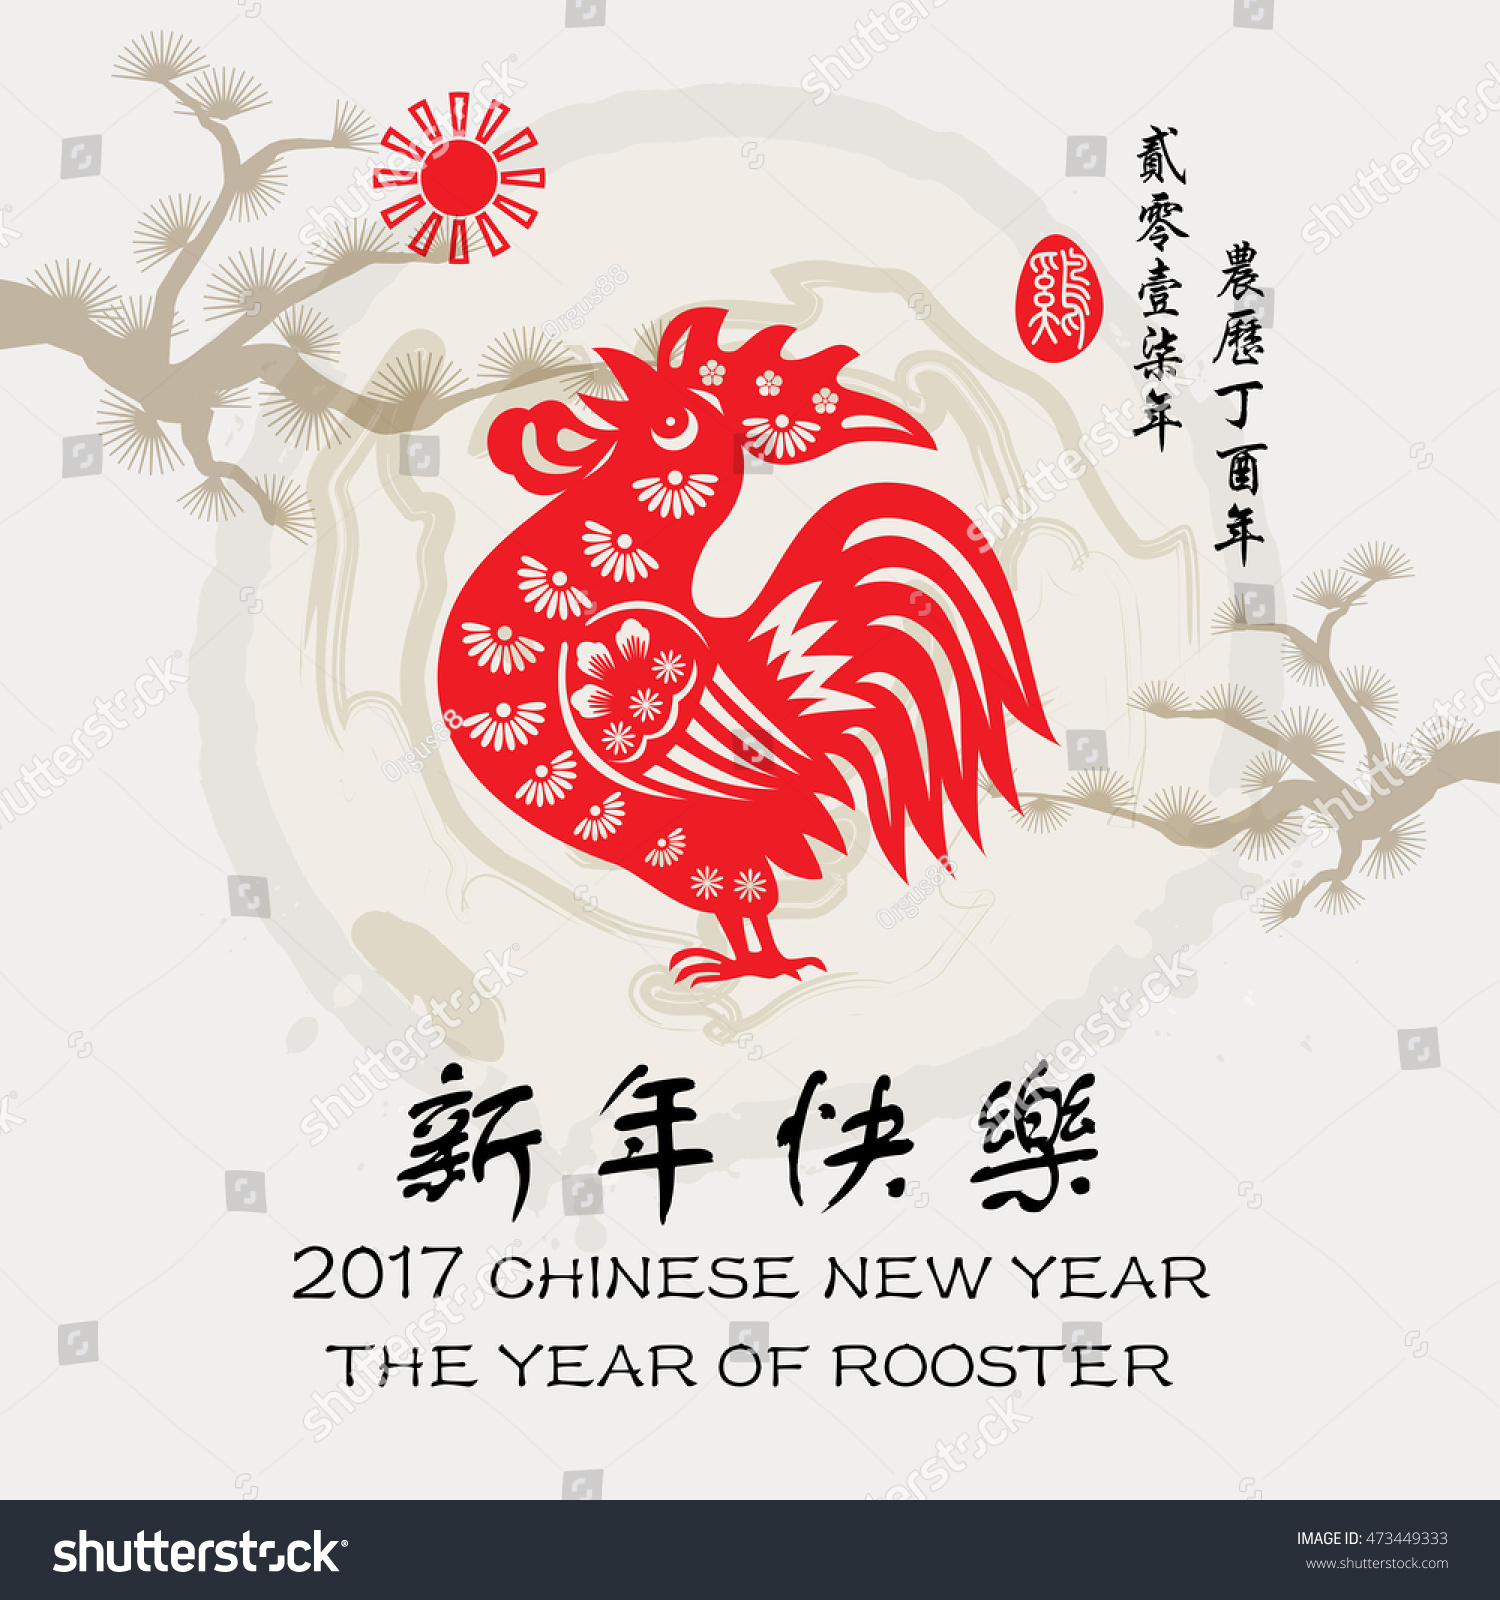 Chinese Year Rooster Made By Chinese Stock Vector 473449333 - Shutterstock